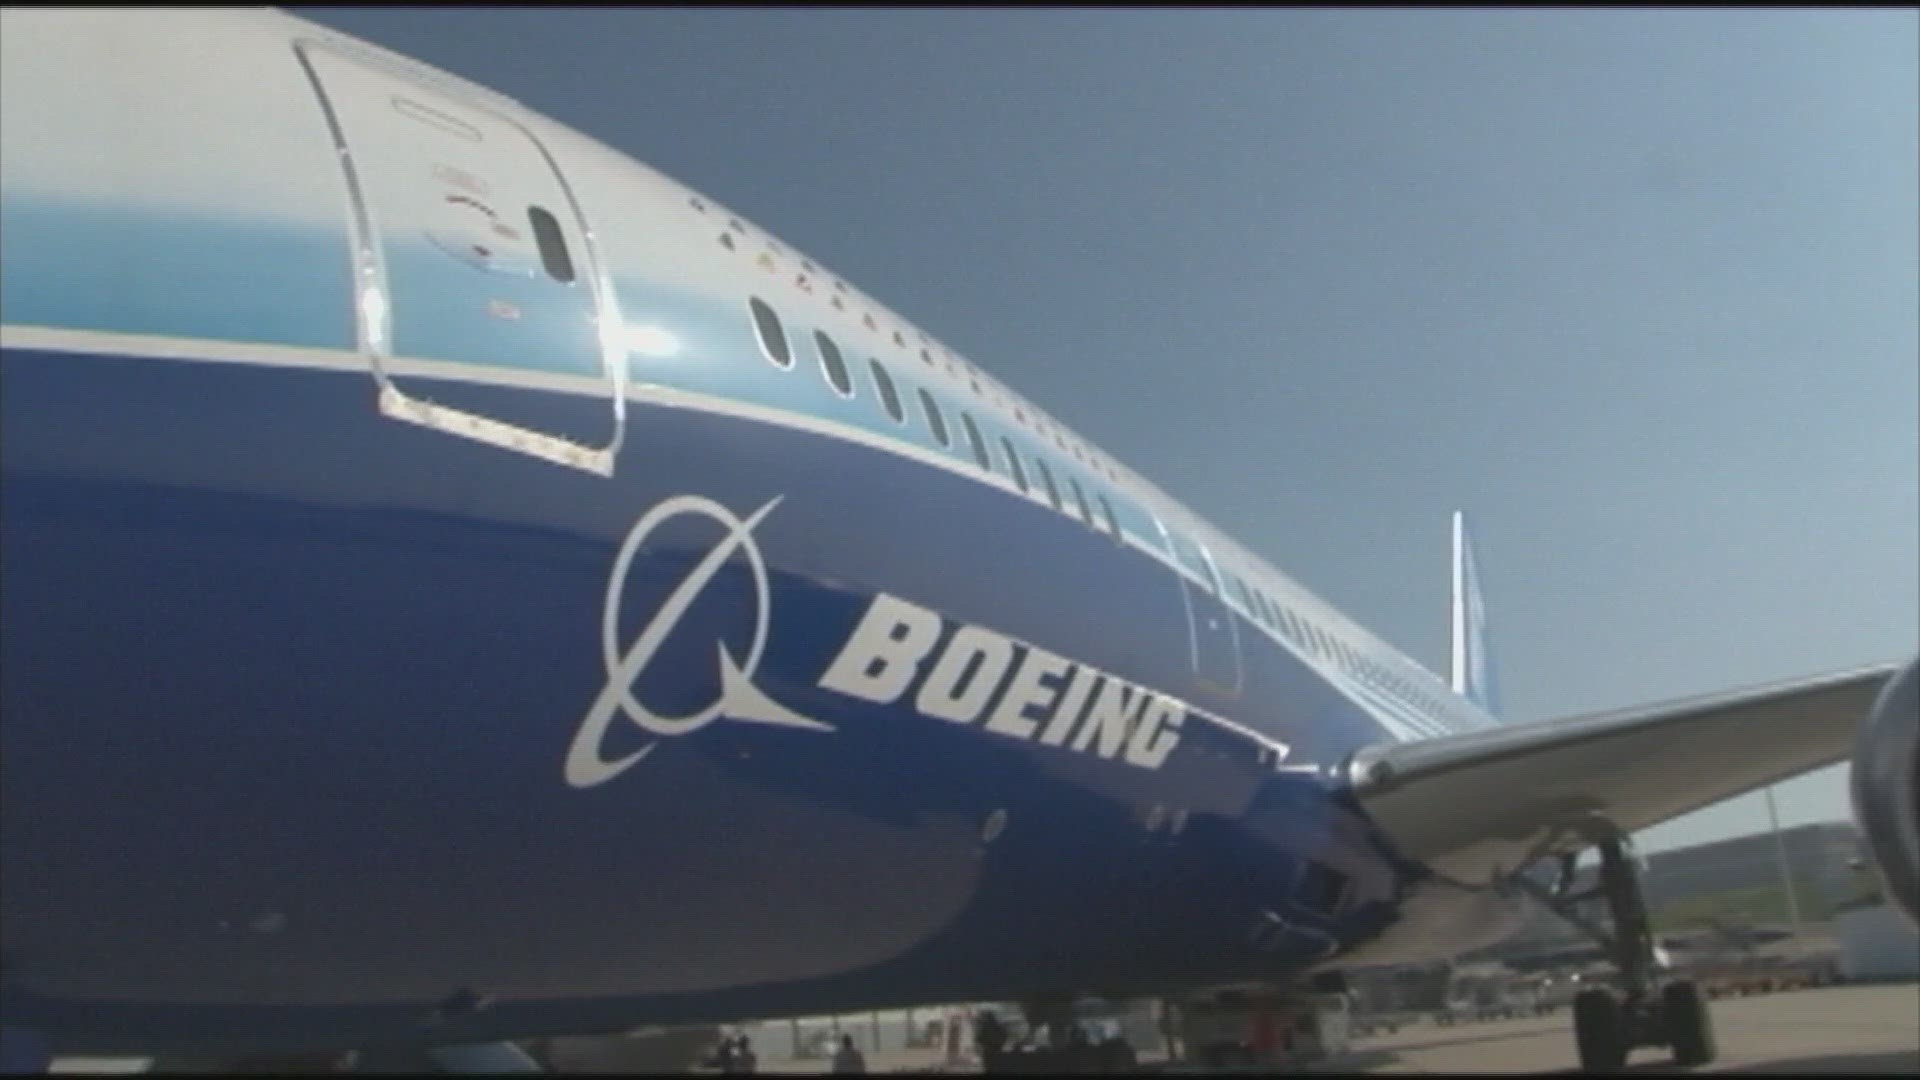 Boeing's first quarter earnings report shows a loss of $3.9 billion, that this is actually less than the $4.5 billion loss that was expected.